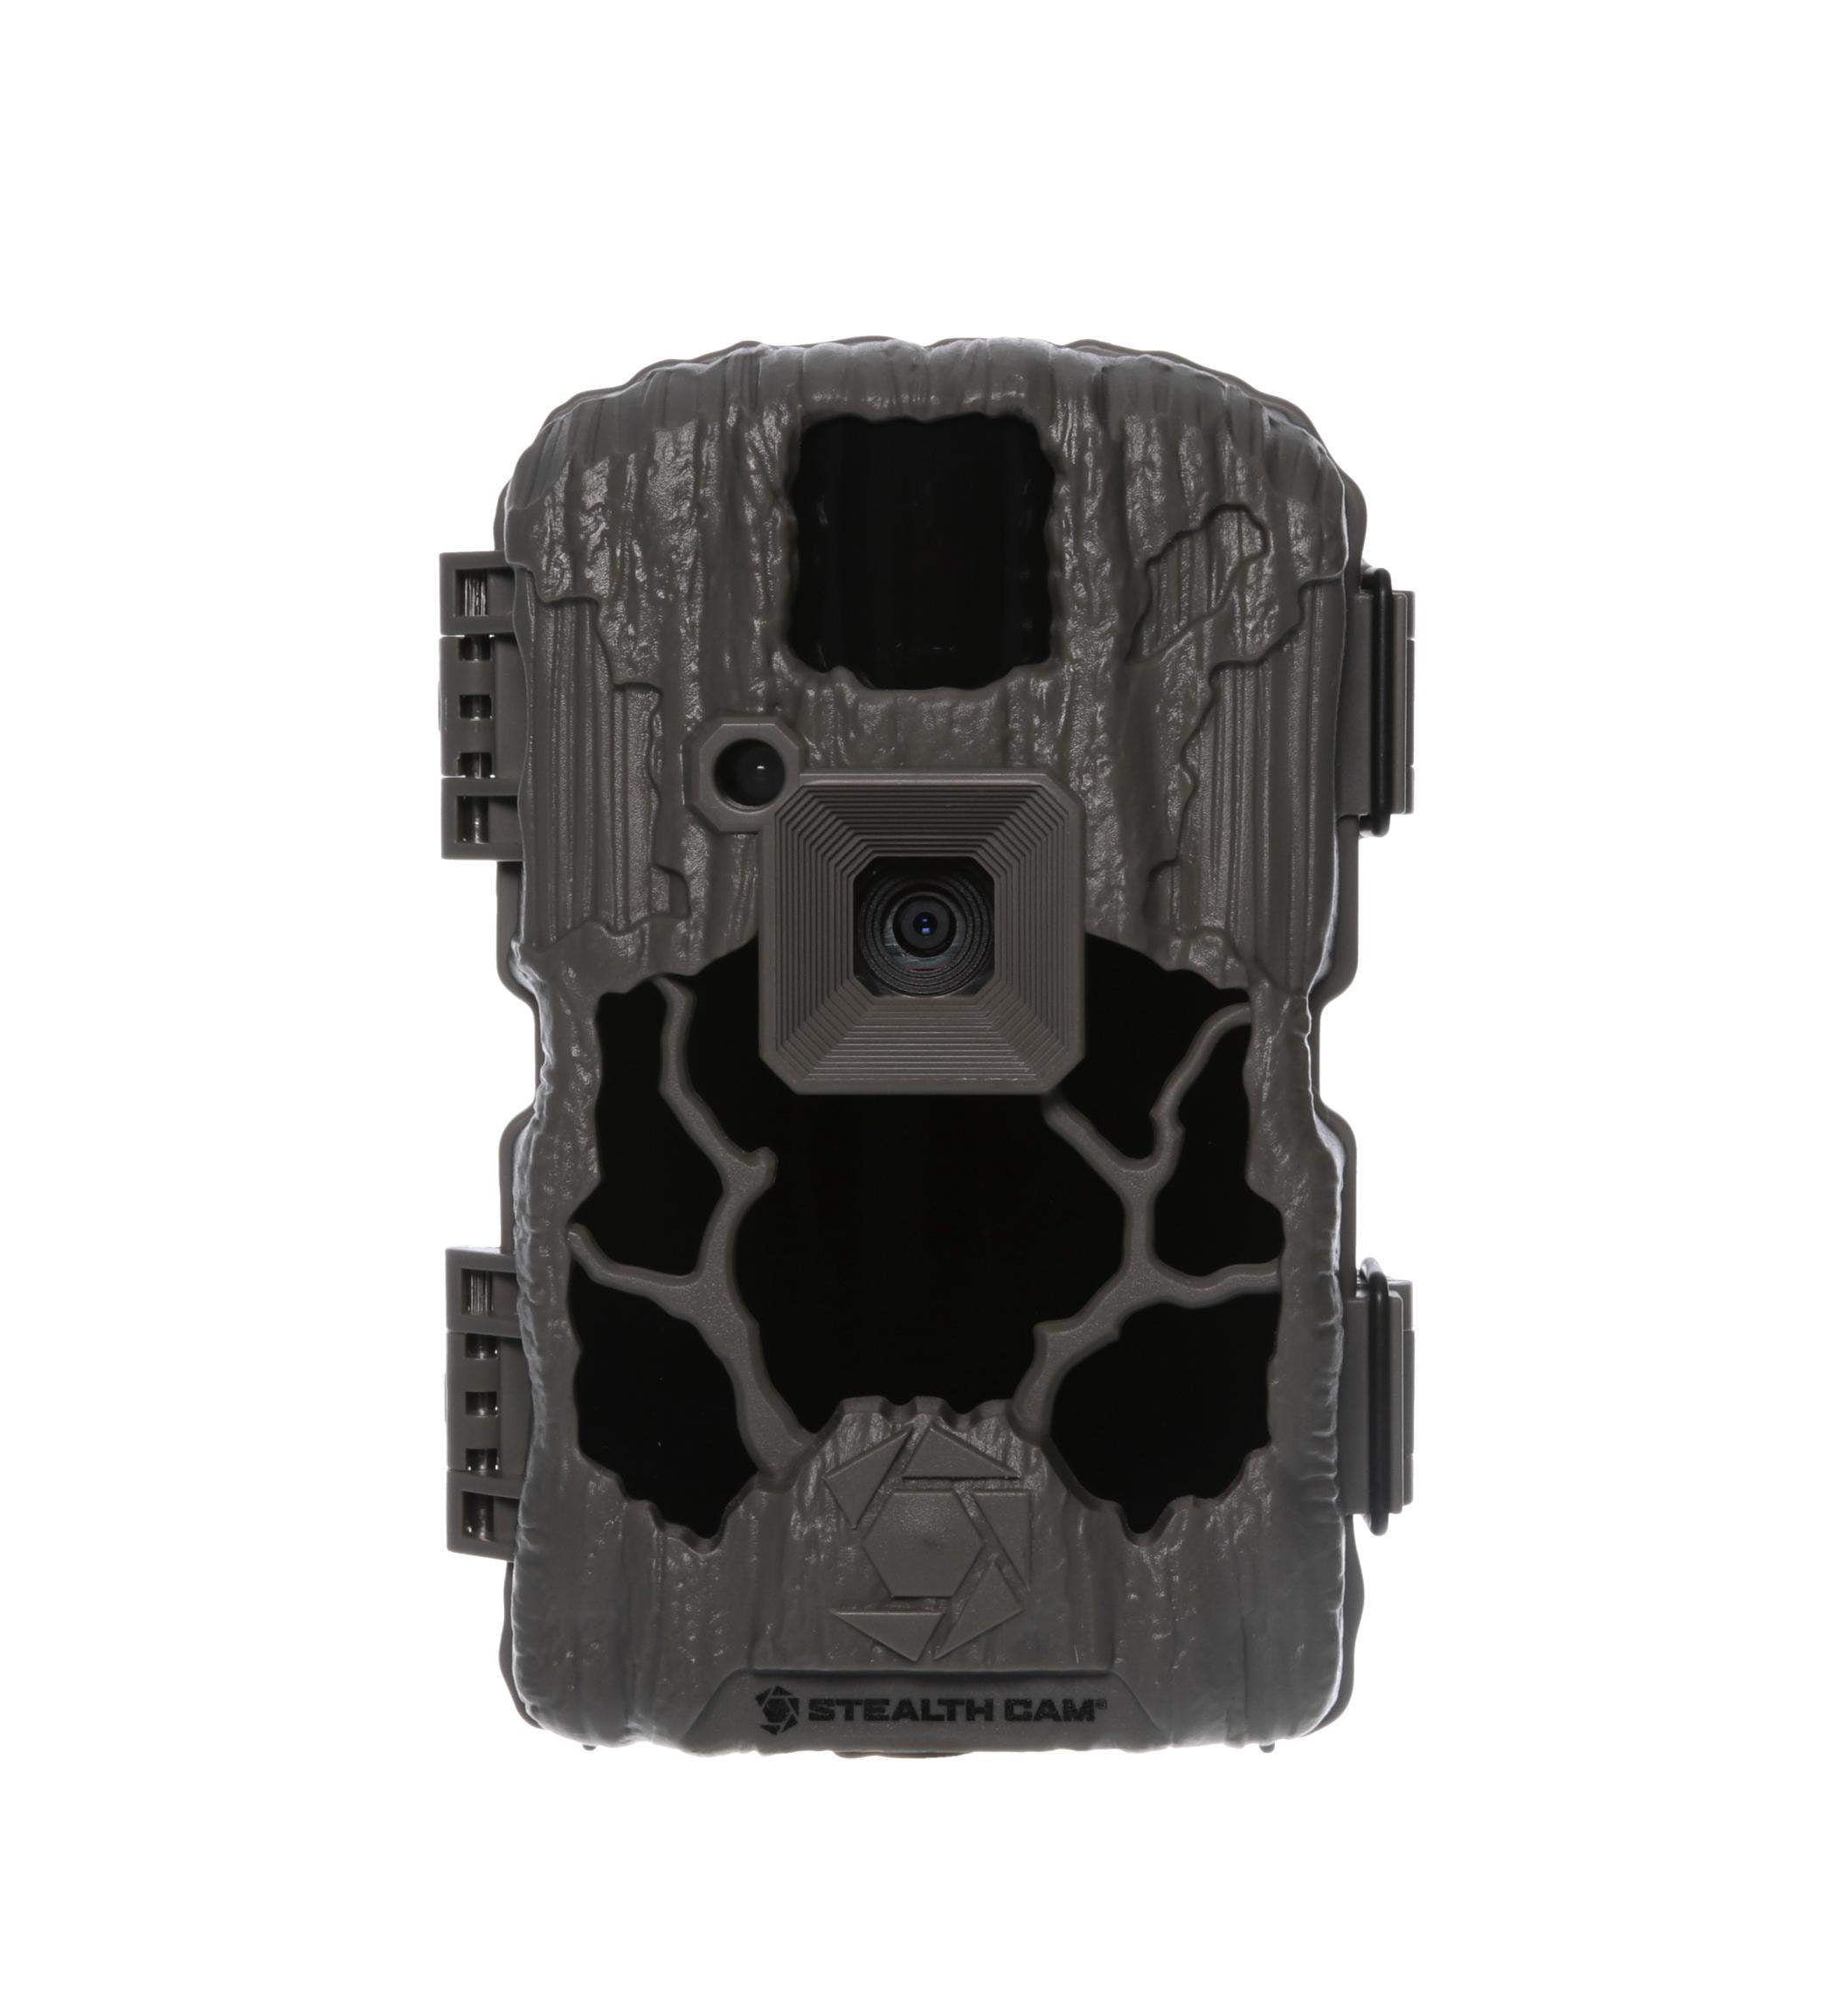 Stealth Cam G34 Trail Camera 26 MP for sale online 